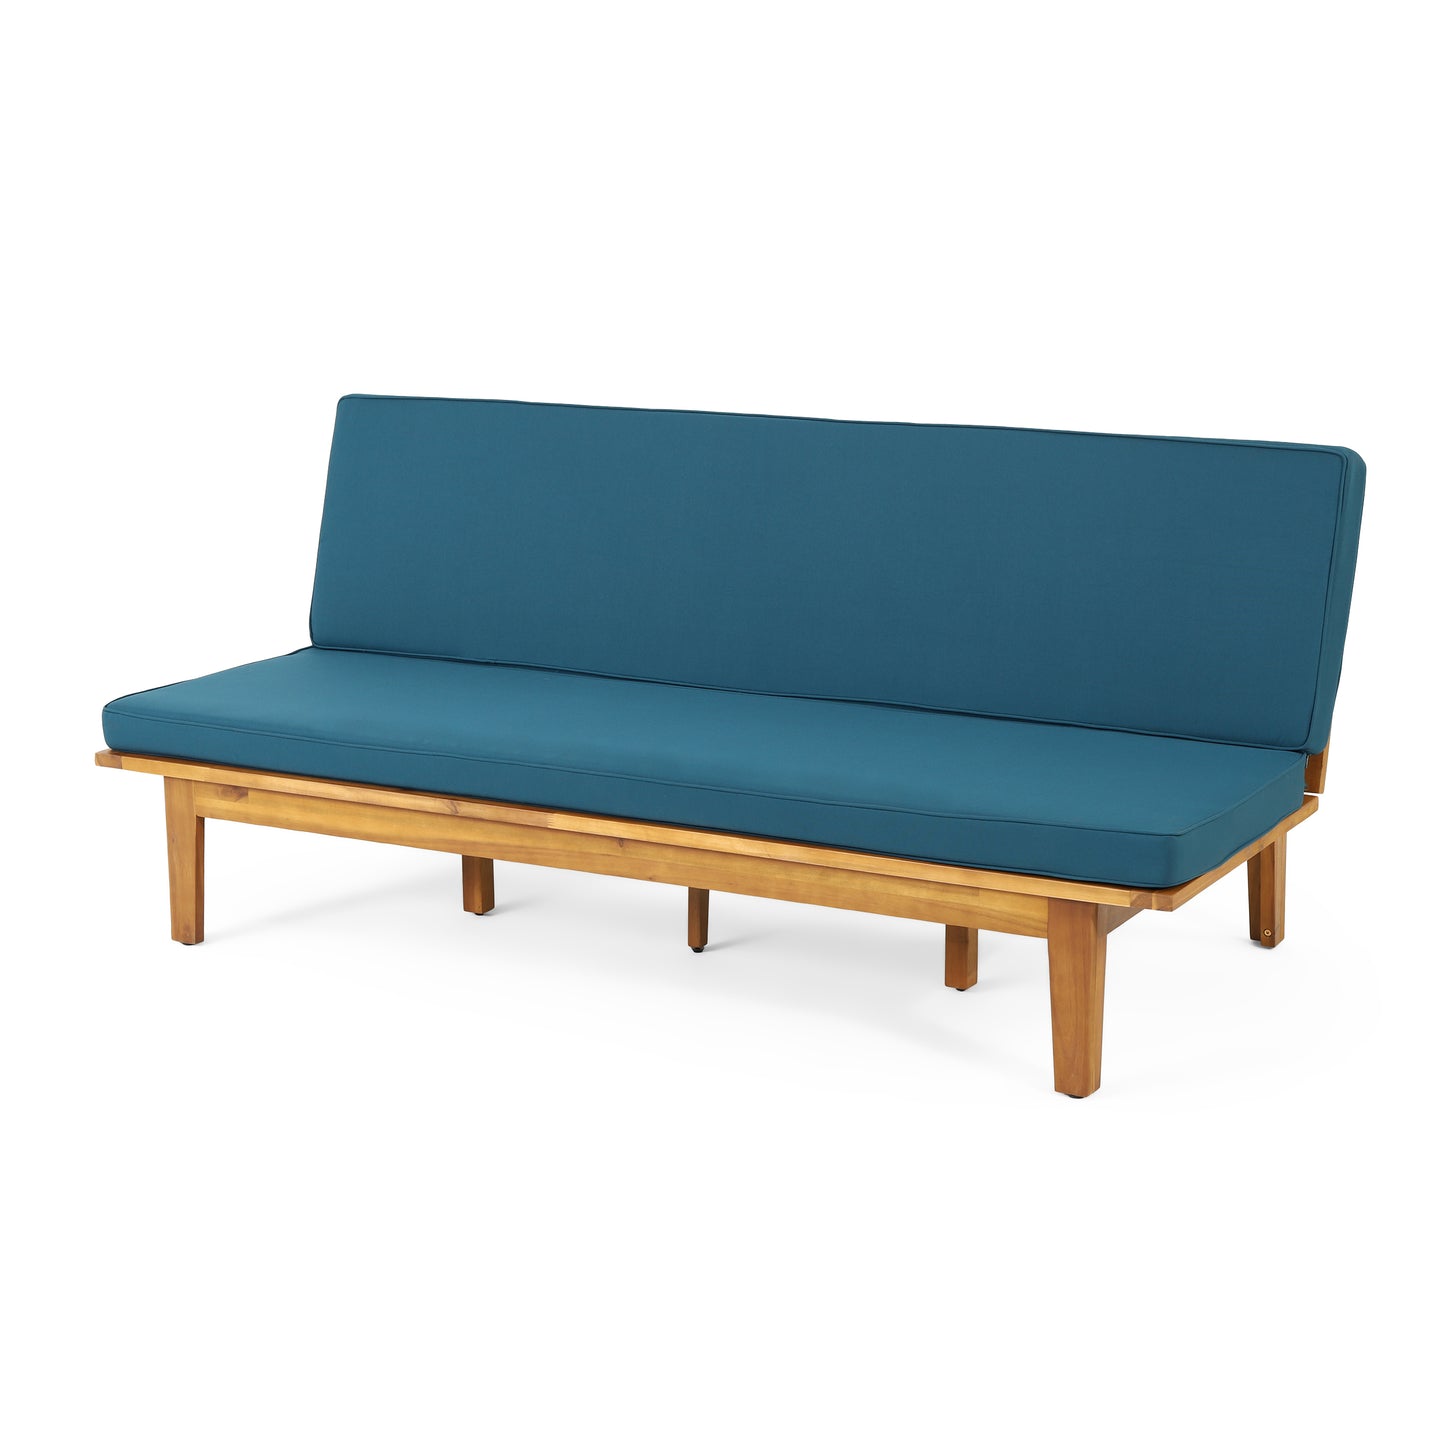 Riebe Outdoor Acacia Wood Convertible Daybed with Cushion